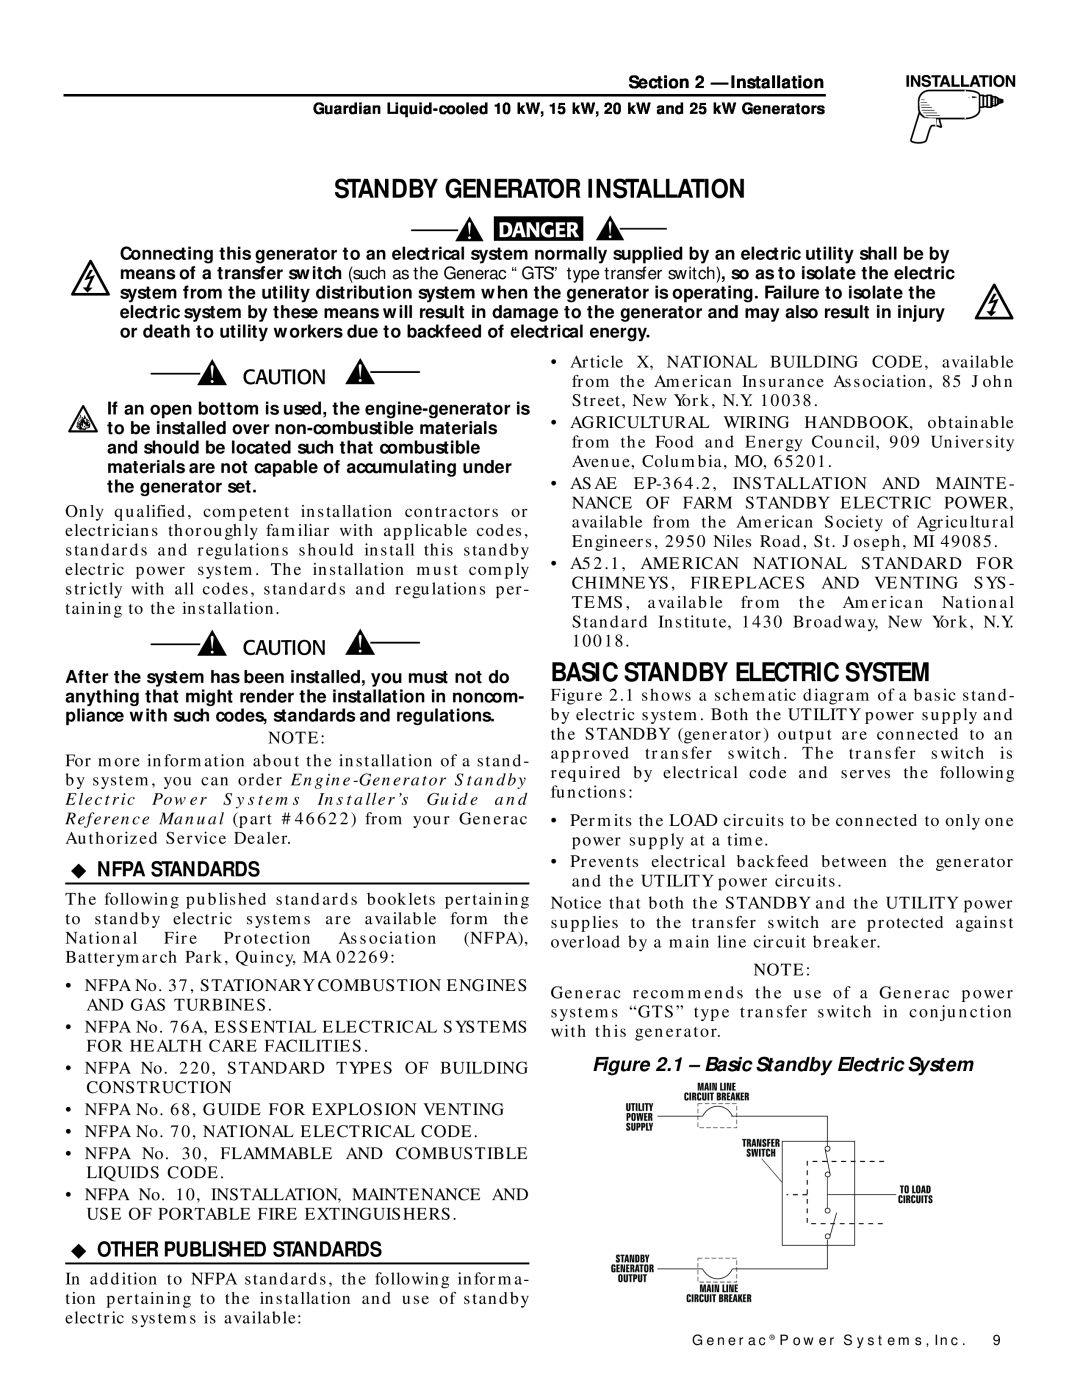 Generac Power Systems owner manual Standby Generator Installation, Basic Standby Electric System, Nfpa Standards 